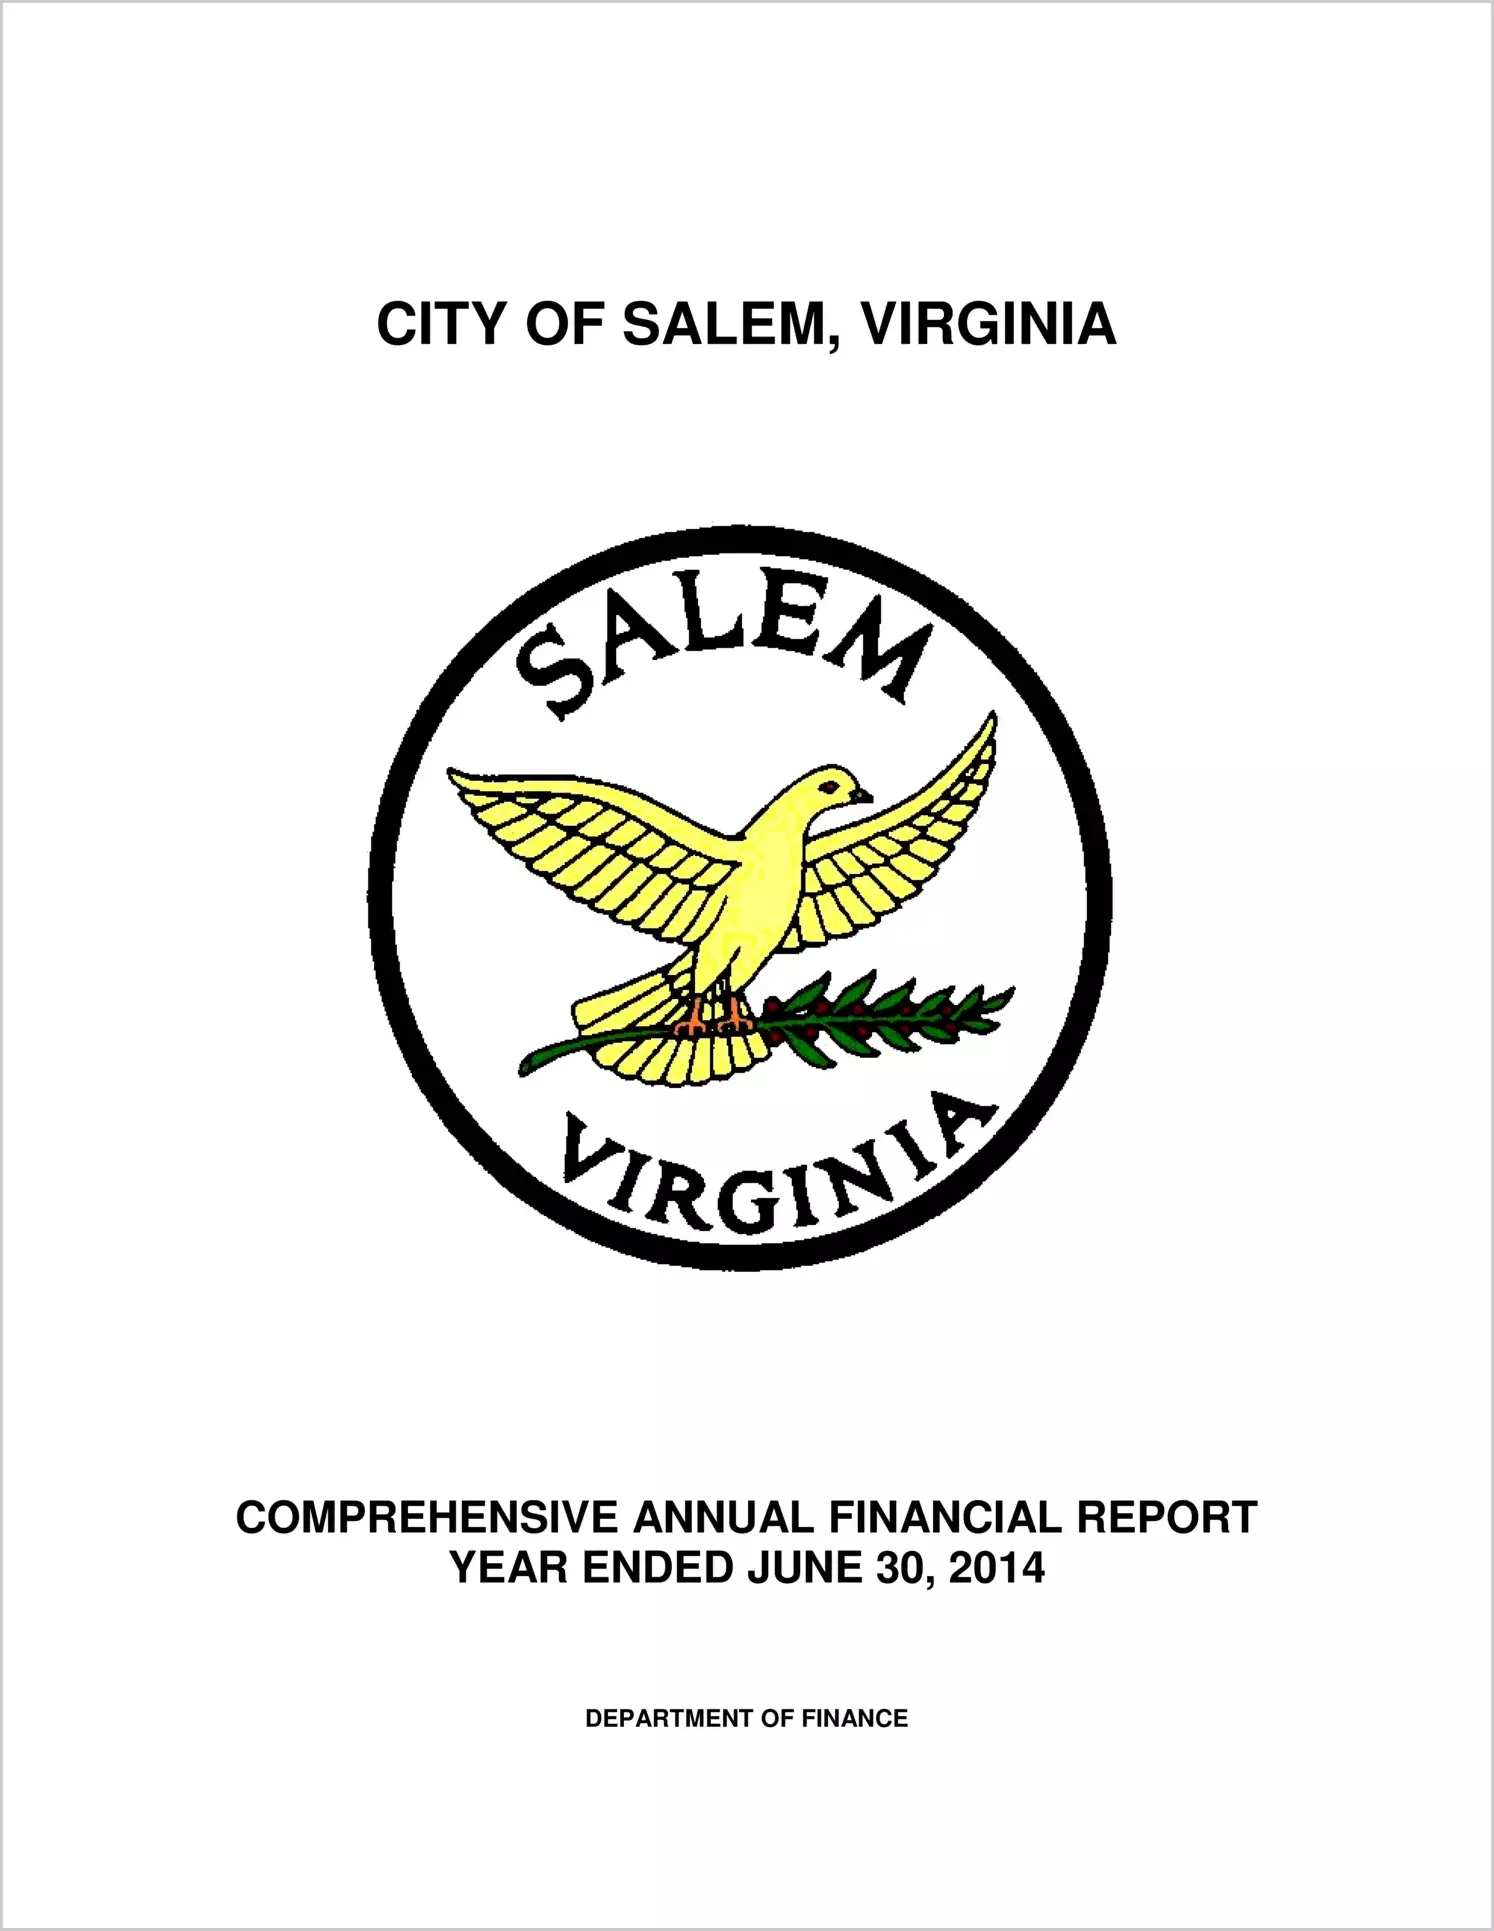 2014 Annual Financial Report for City of Salem